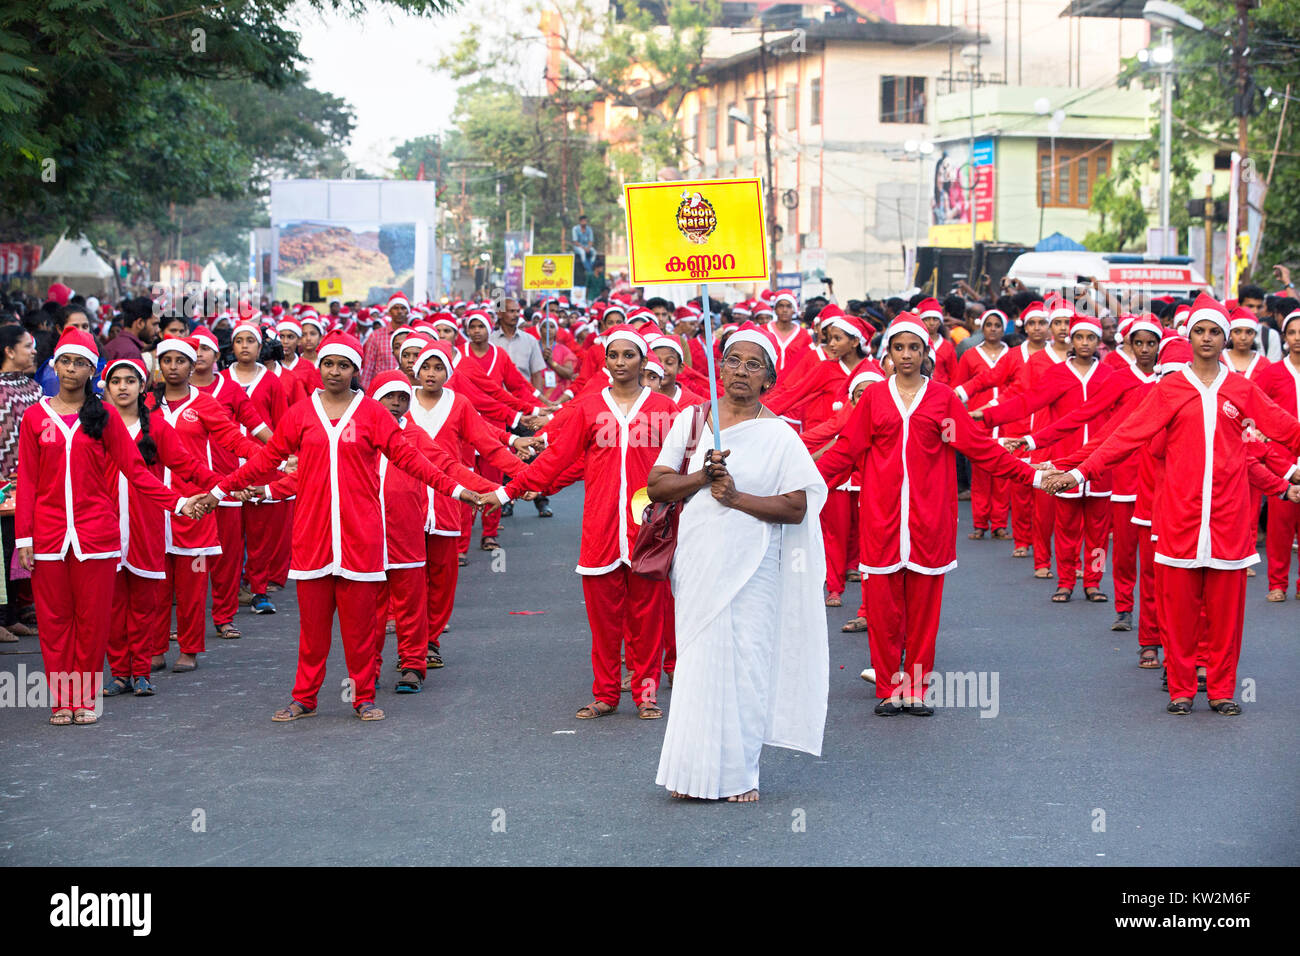 Buon Natale 2020 Thrissur.Buon Natale The Christmas Celebration Of Thrissur Archdiocese Will Stock Photo Alamy